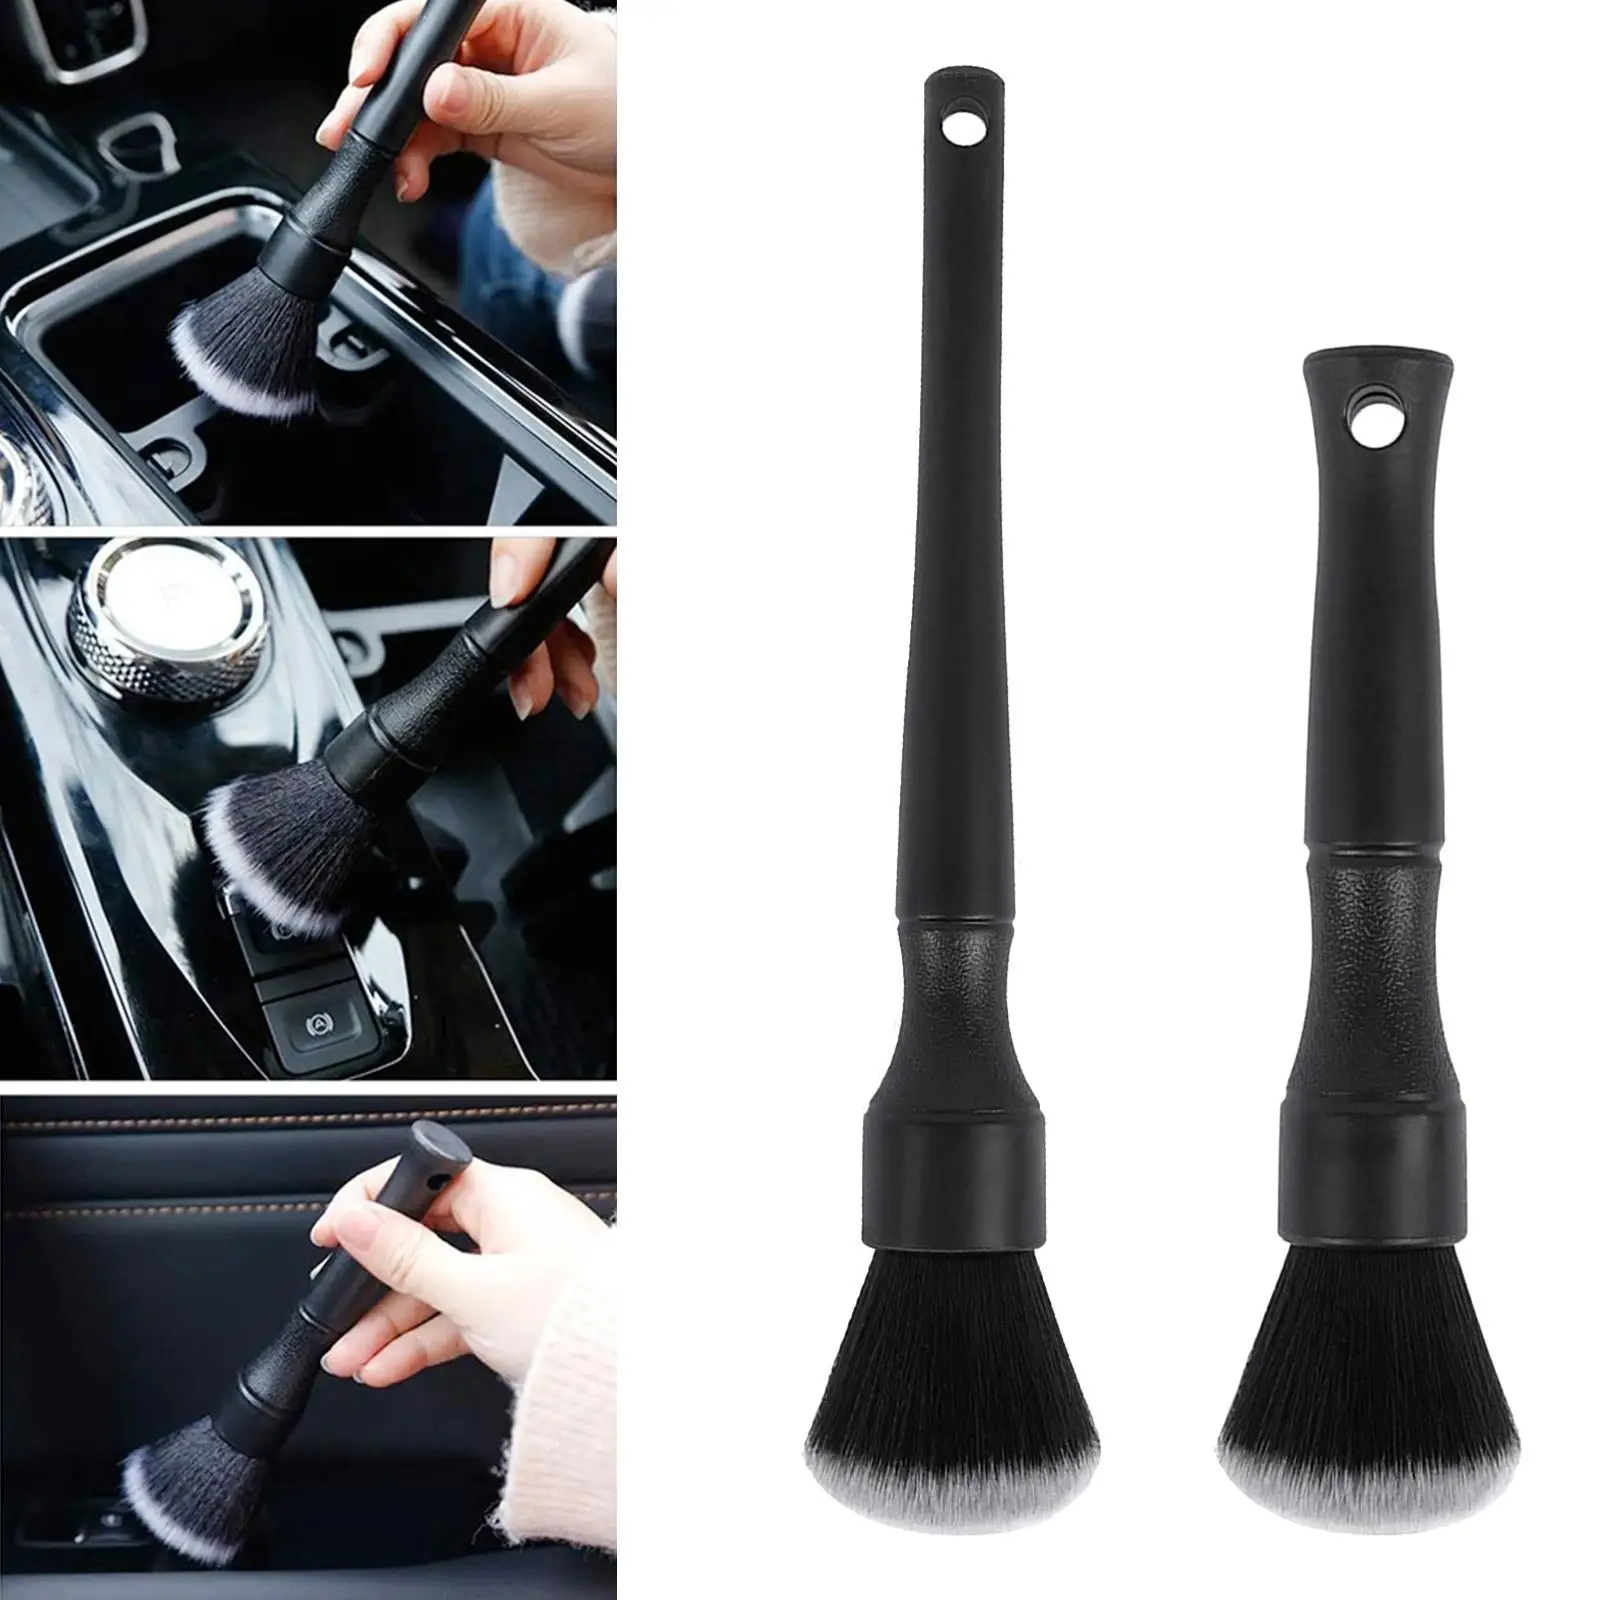 Soft Automotive Detail Brushes Fit for Cleaning Interior Exterior